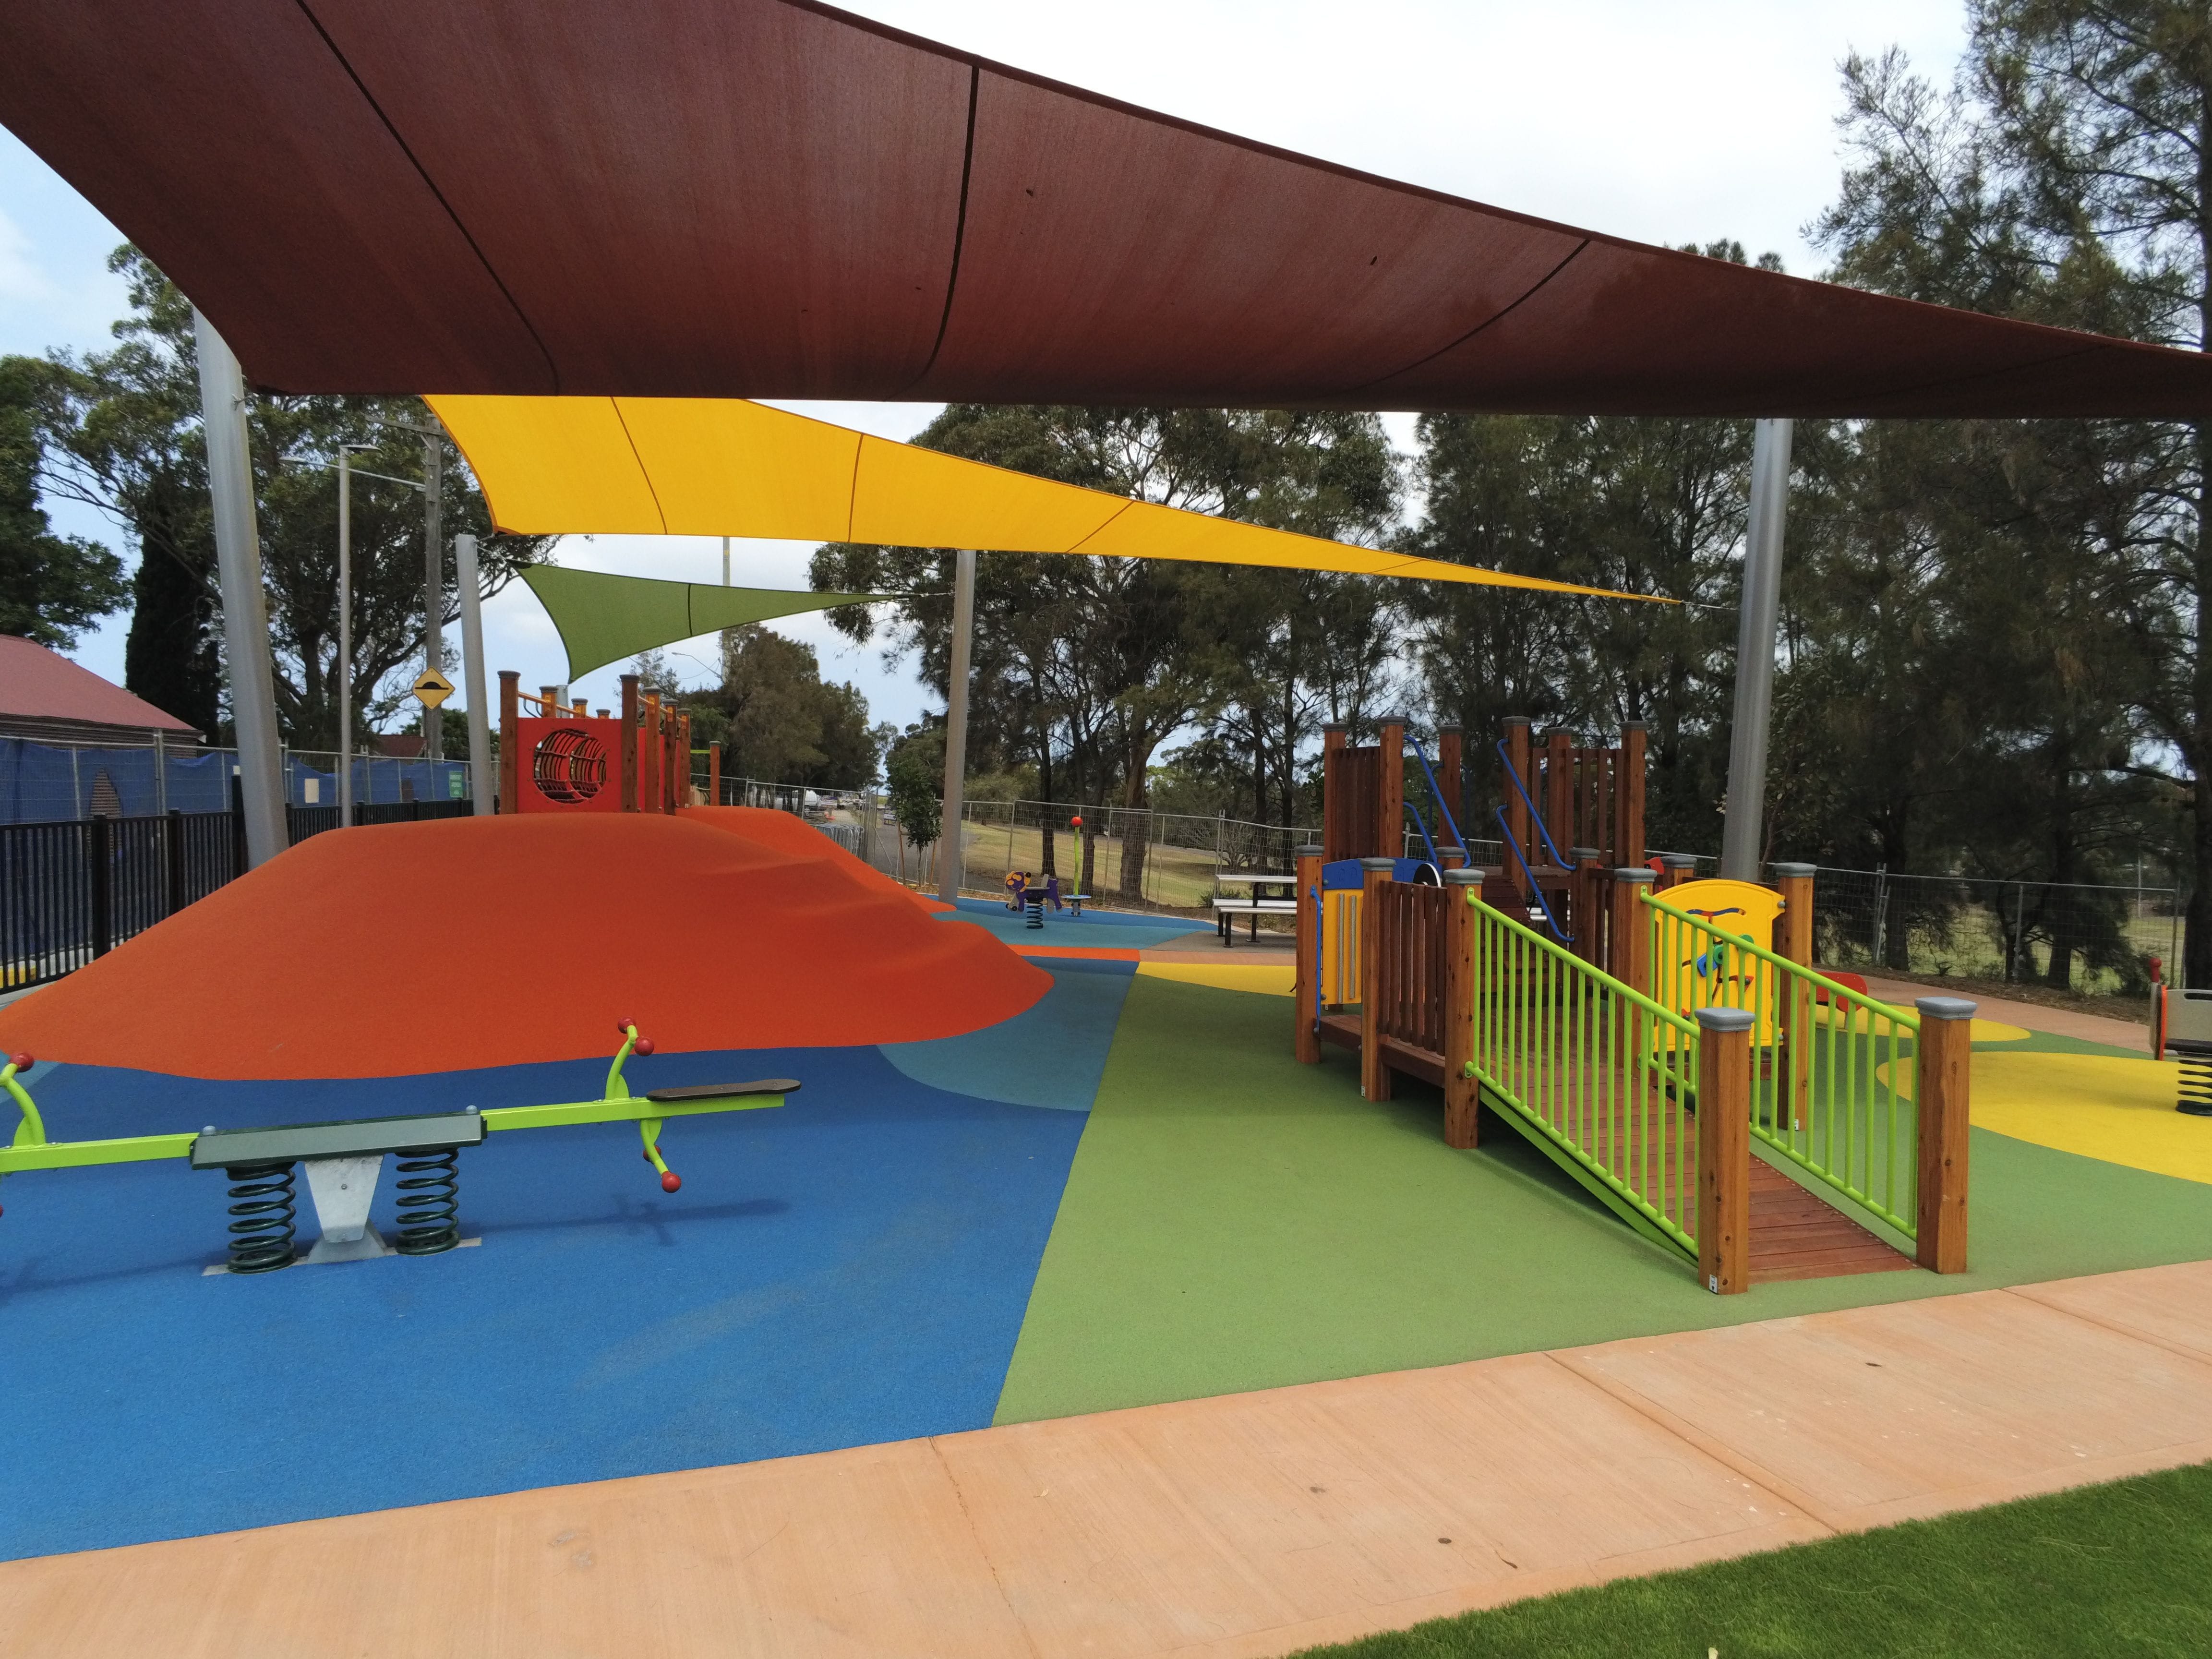 Australian Sports & Safety Surfaces - Inclusive Adventure Playground and Bike Training Circuit at Kempt Field Image -5df9793b03b68